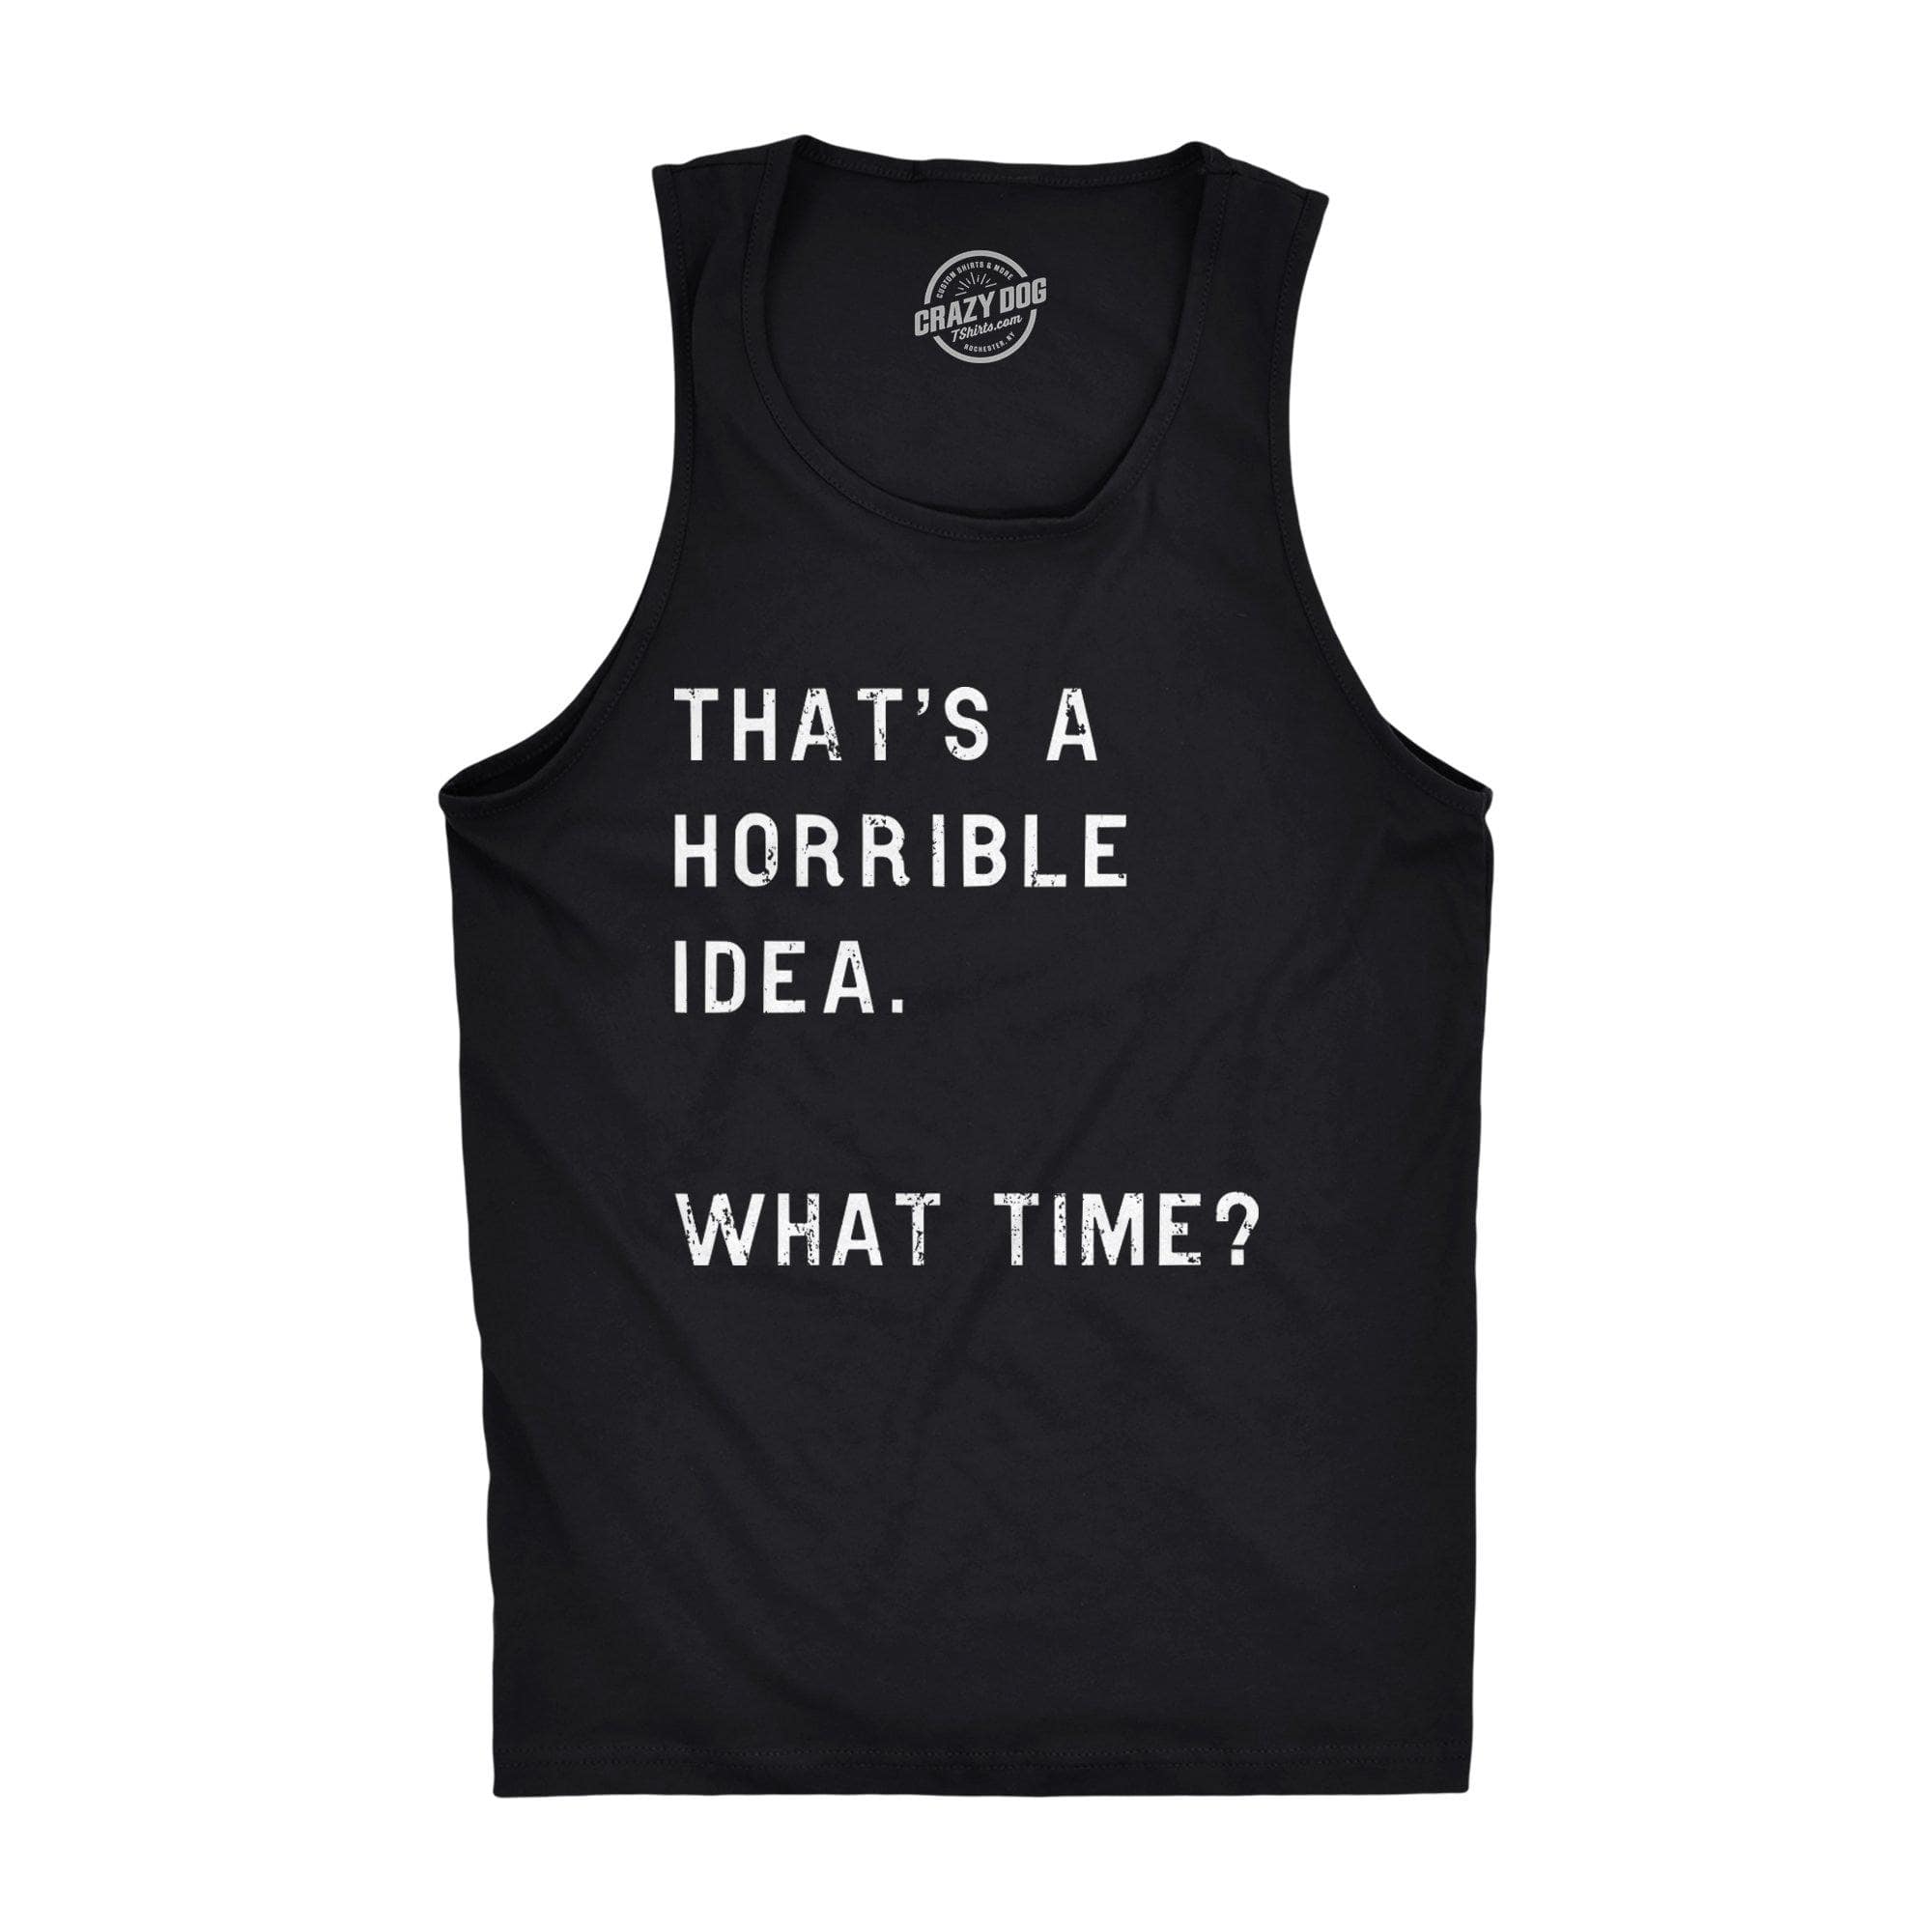 That's A Horrible Idea. What Time? Men's Tank Top  -  Crazy Dog T-Shirts